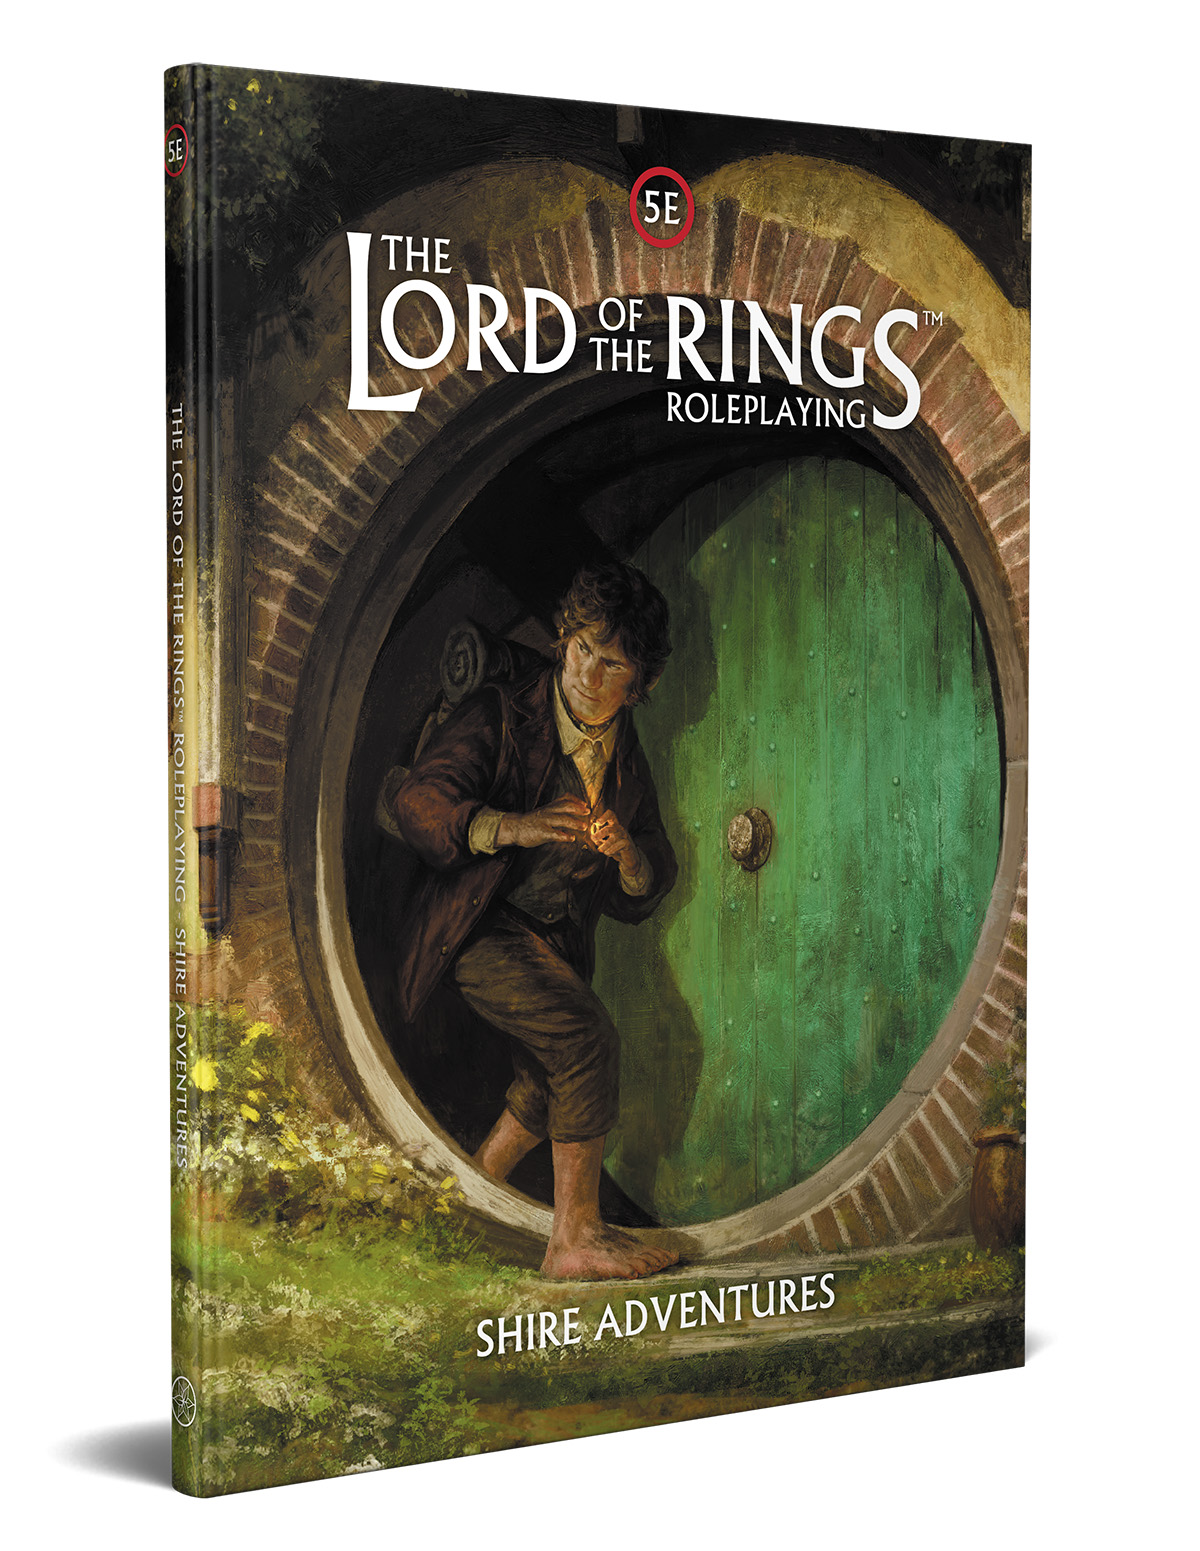 The Lord Of The Rings Roleplaying - Shire Adventures - Free League Publishing